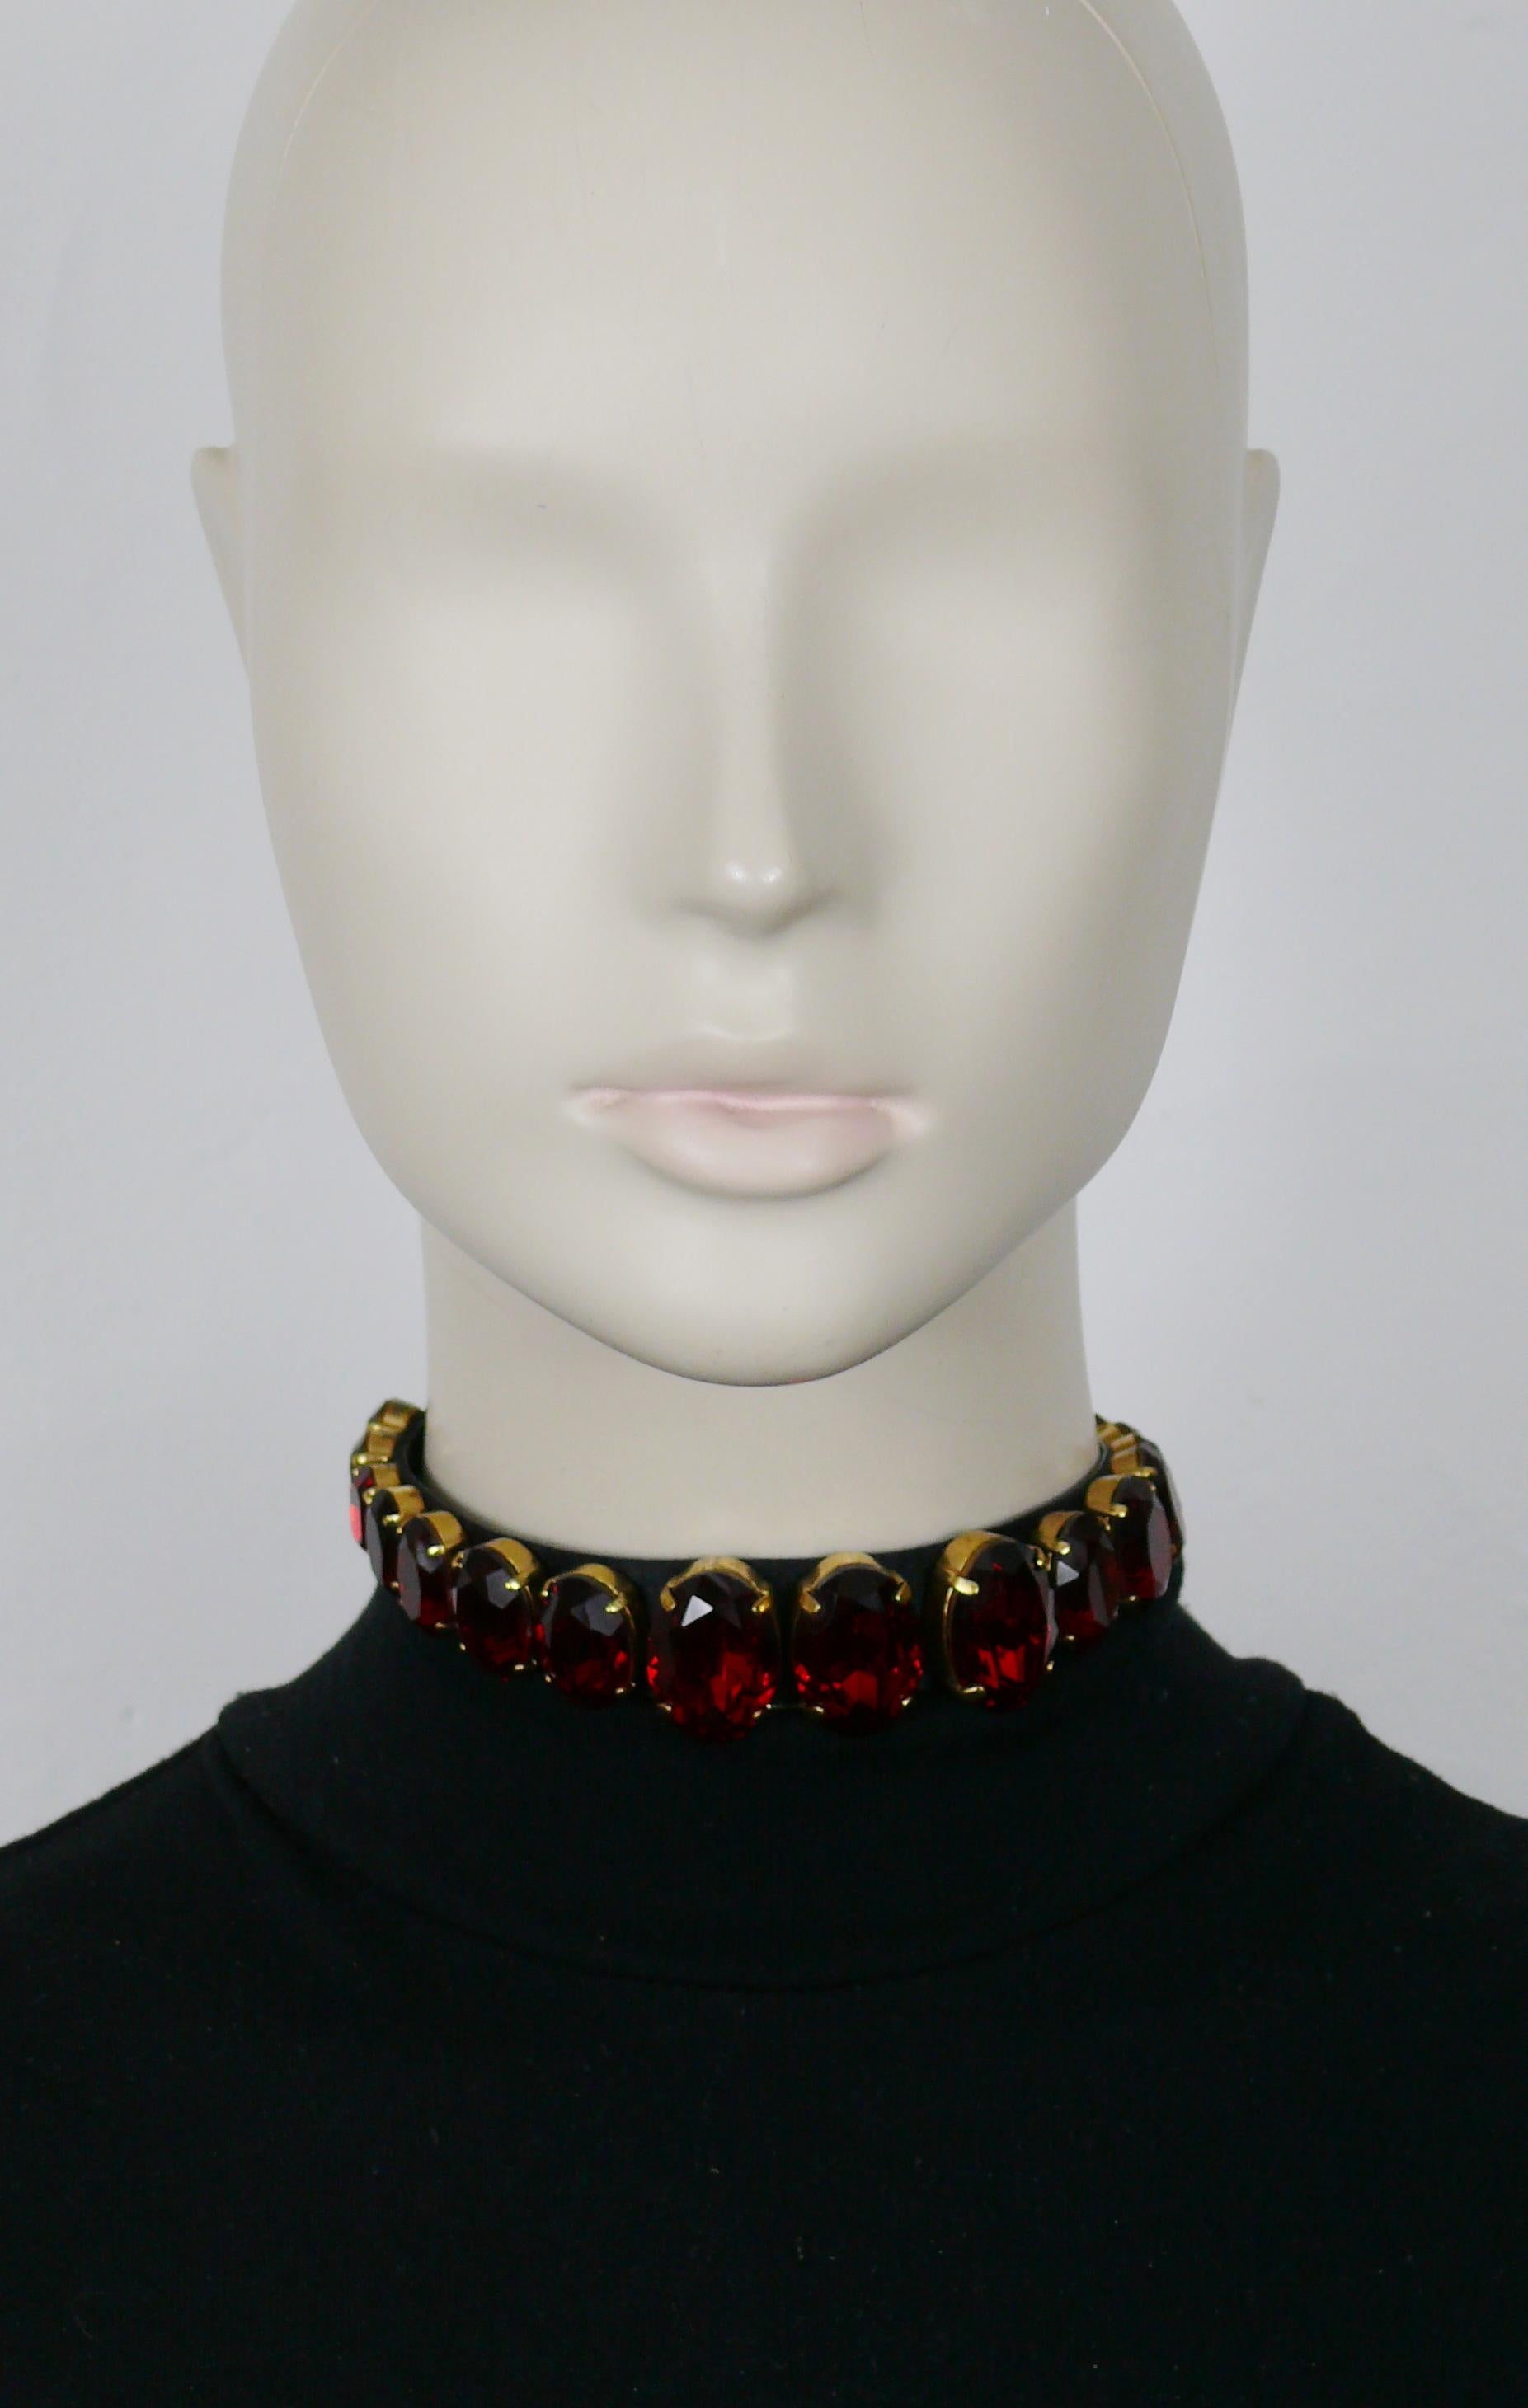 CHANEL vintage black satin collar necklace embellished with graduated ruby colour crystals in a gold tone setting. Black leather lining. 

Similar model (in a clear crystal variant) worn by supermodel LINDA EVANGELISTA on the CHANEL Fall-Winter